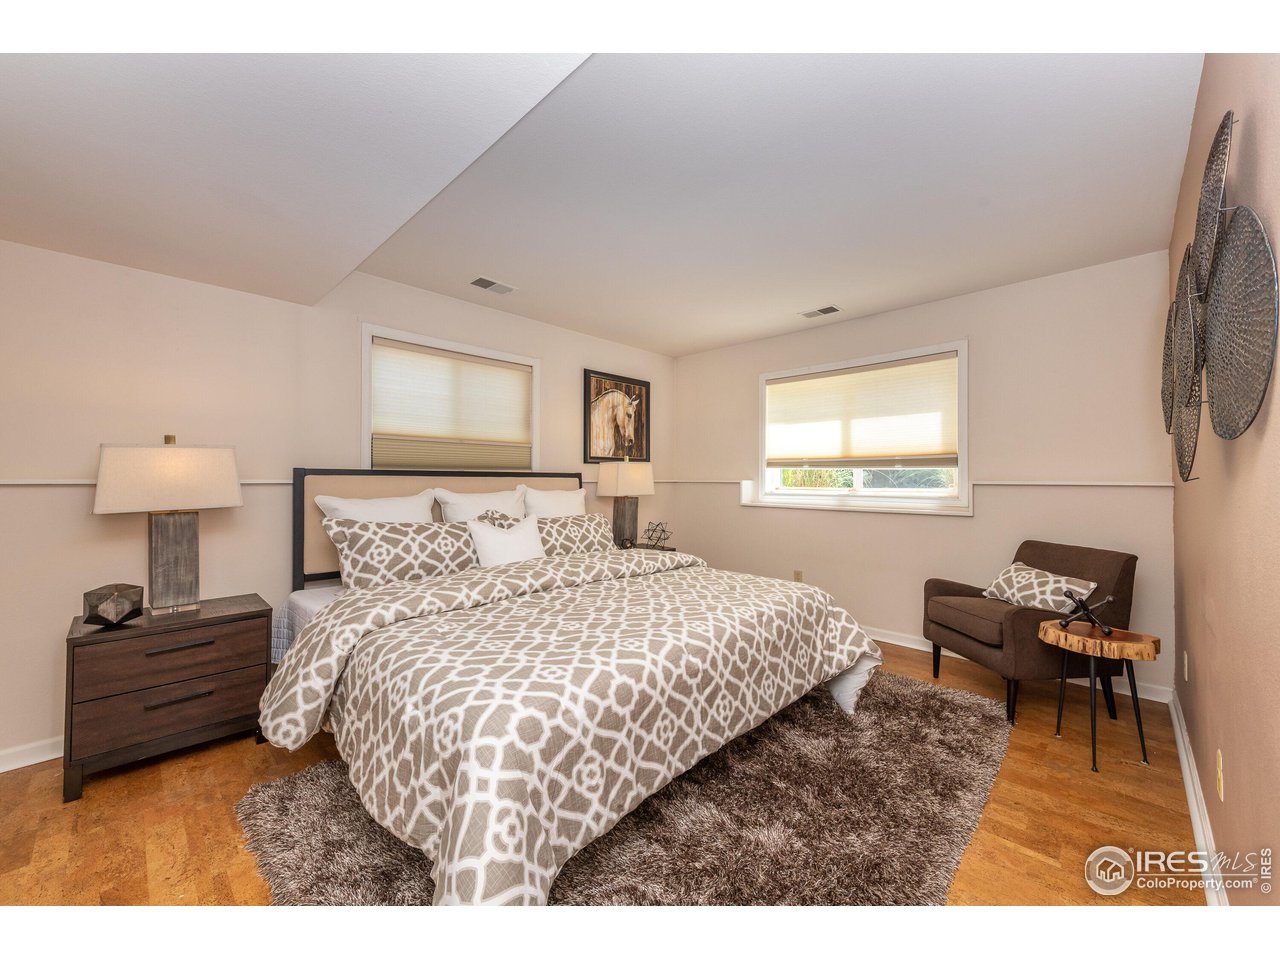 Spacious and airy primary bedroom w/ primary bath and large walk-in closet.